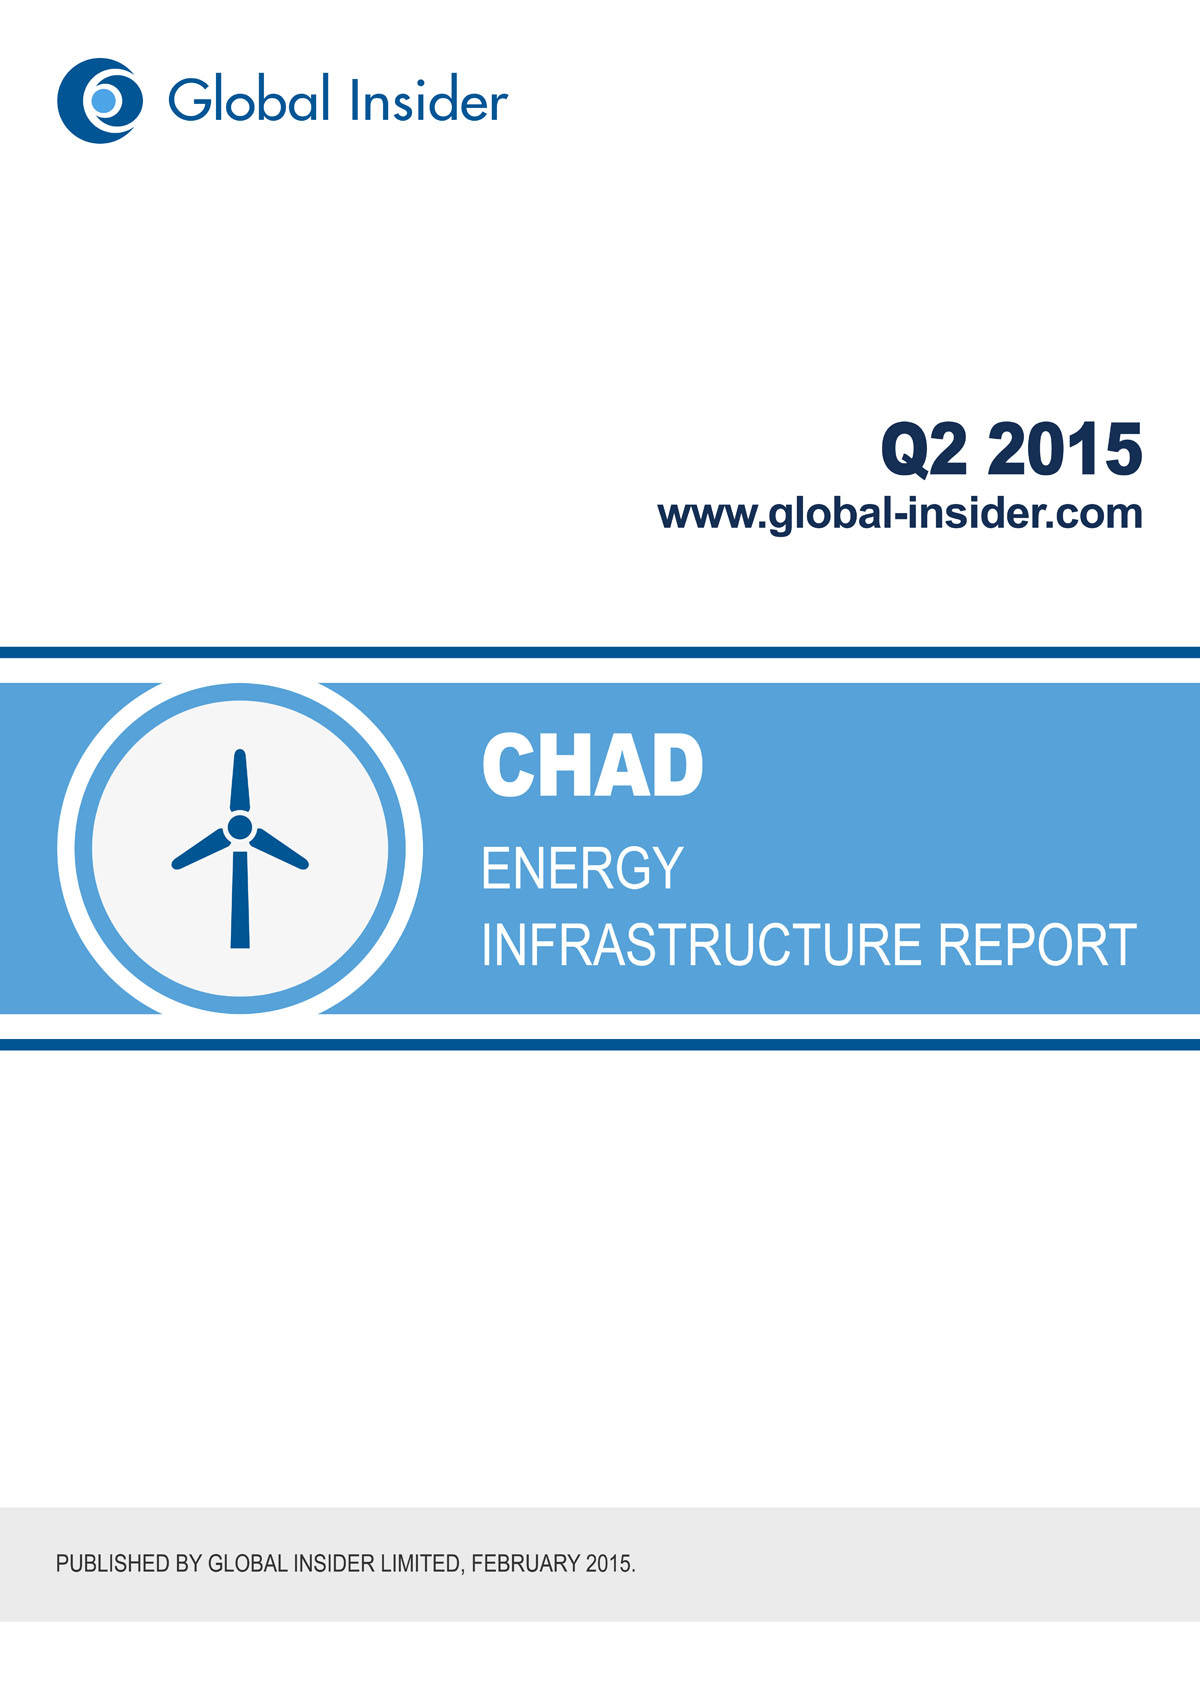 Chad Energy Infrastructure Report